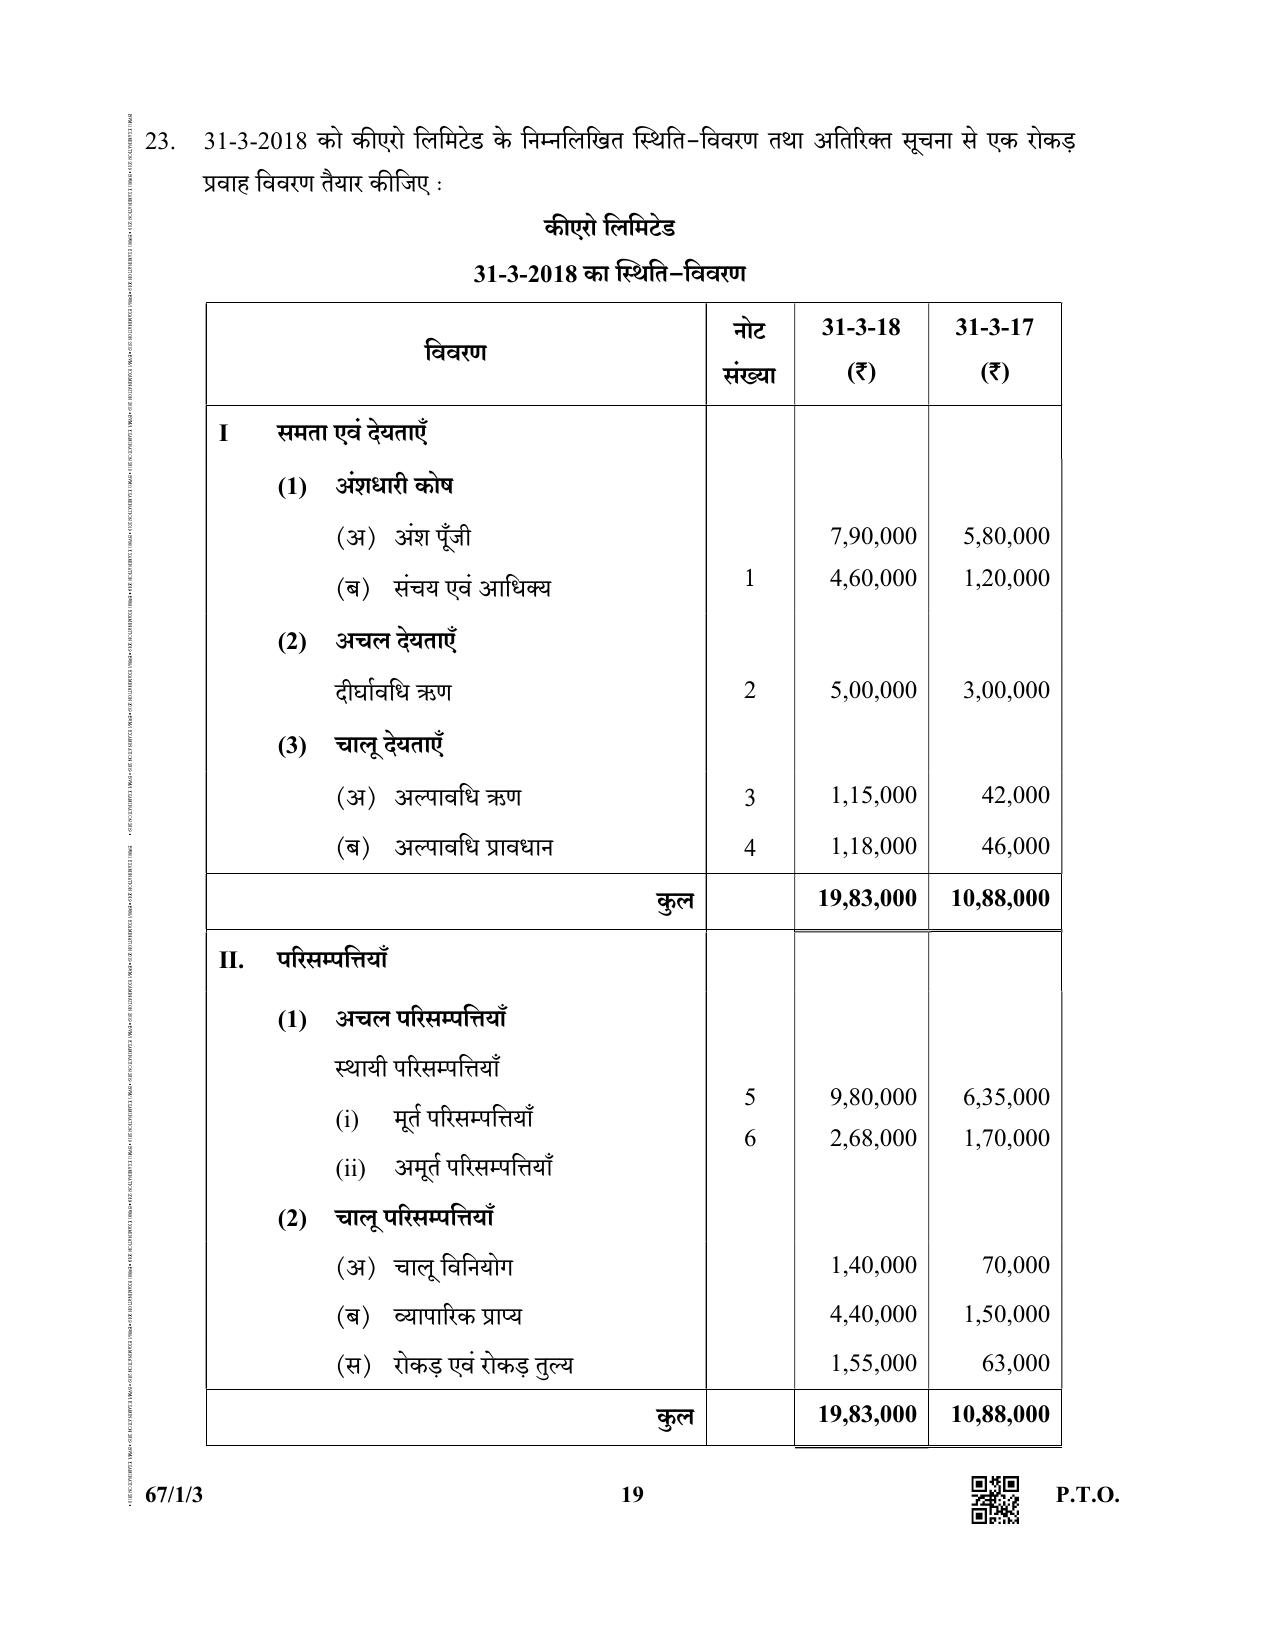 CBSE Class 12 67-1-3  (Accountancy) 2019 Question Paper - Page 19